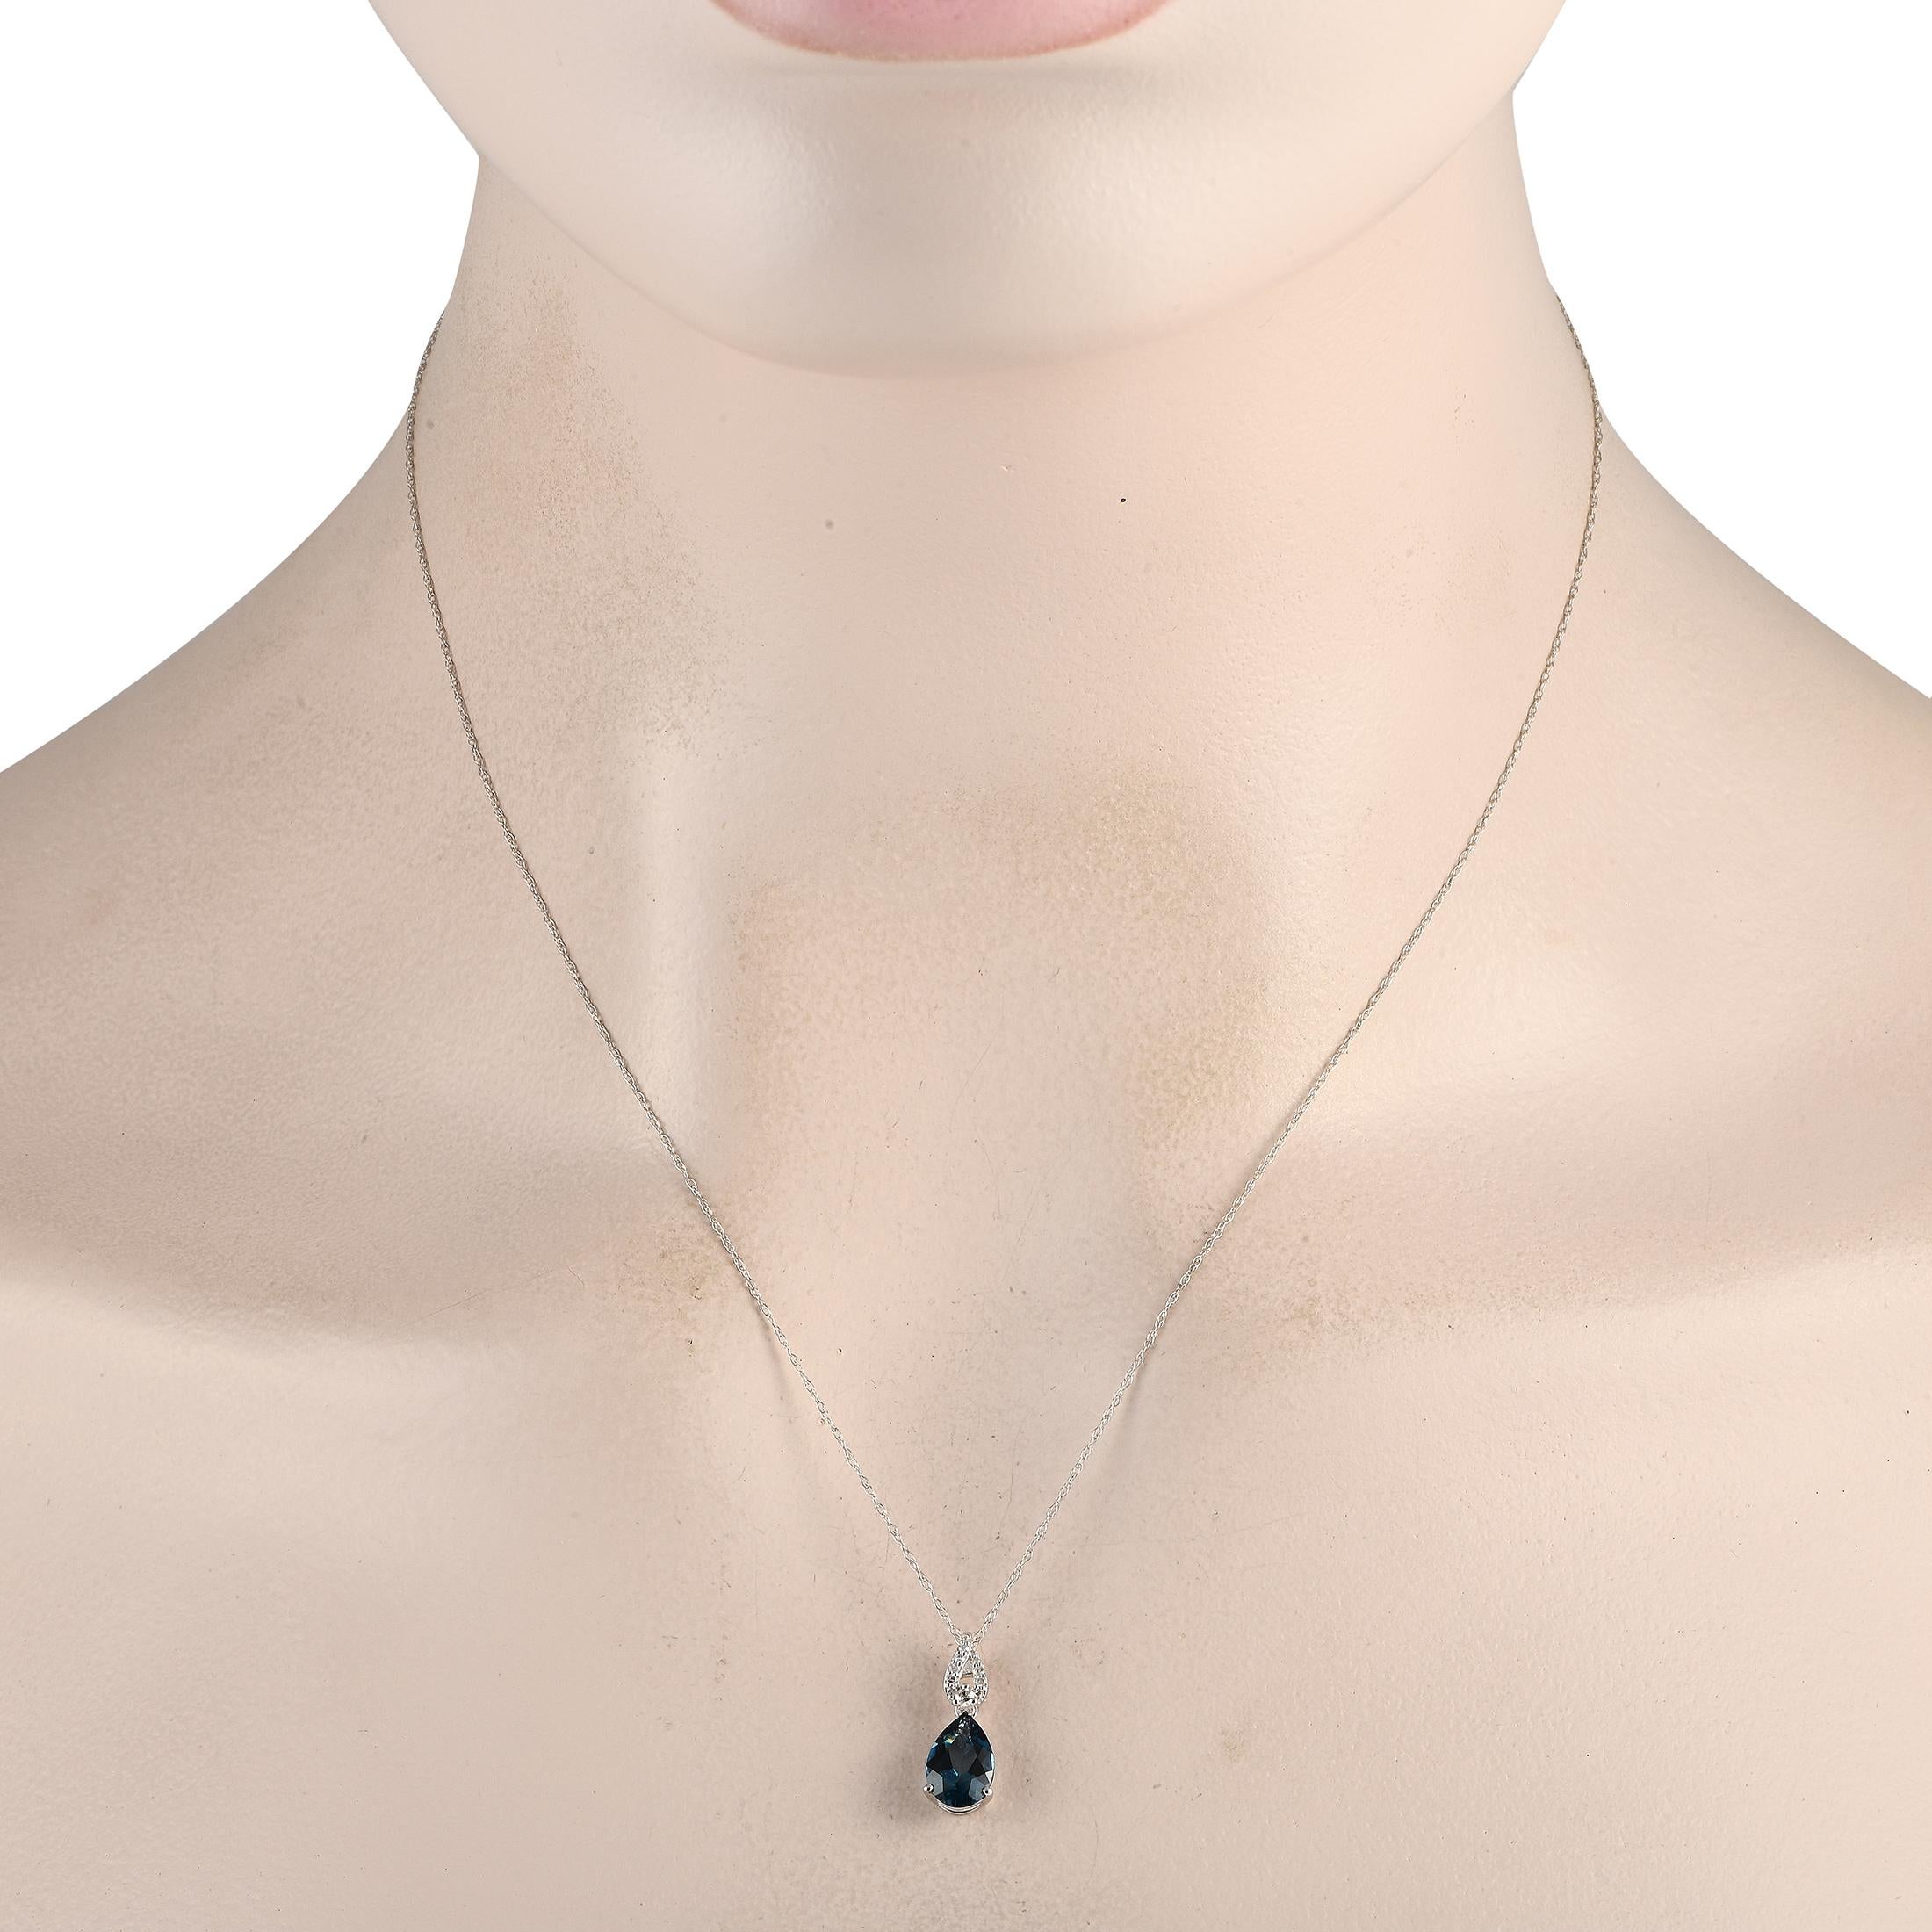 This necklace will add a layer of sophistication to any look. It has an 18 long cable chain crafted in 14K white gold and a diamond-dotted link-style bail that complements the vivid blue shine of the pear-cut blue topaz.Offered brand new, these LB